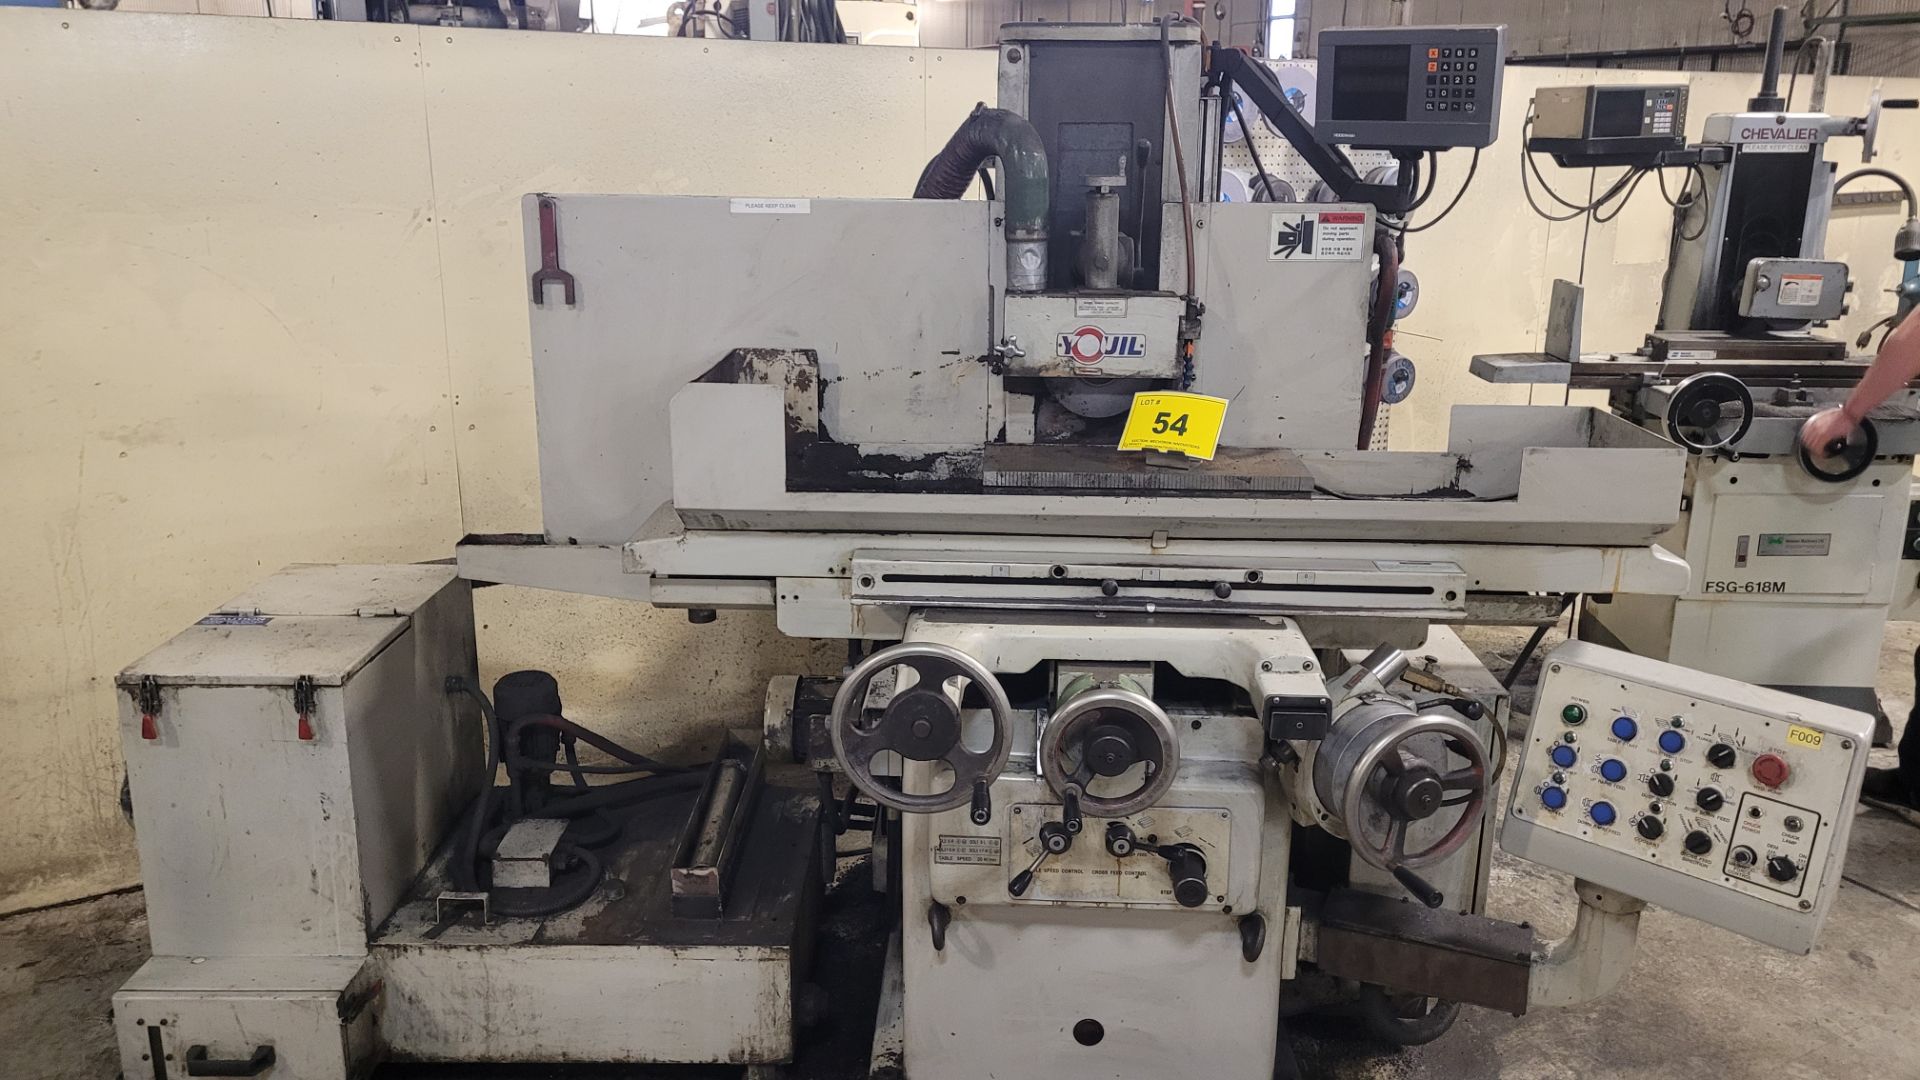 YOUIL YGS-52A SURFACE GRINDER, HEIDENHAIN DRO, 550MM X 200MM WORKING SURFACE, 2HP, S/N 5291208 (